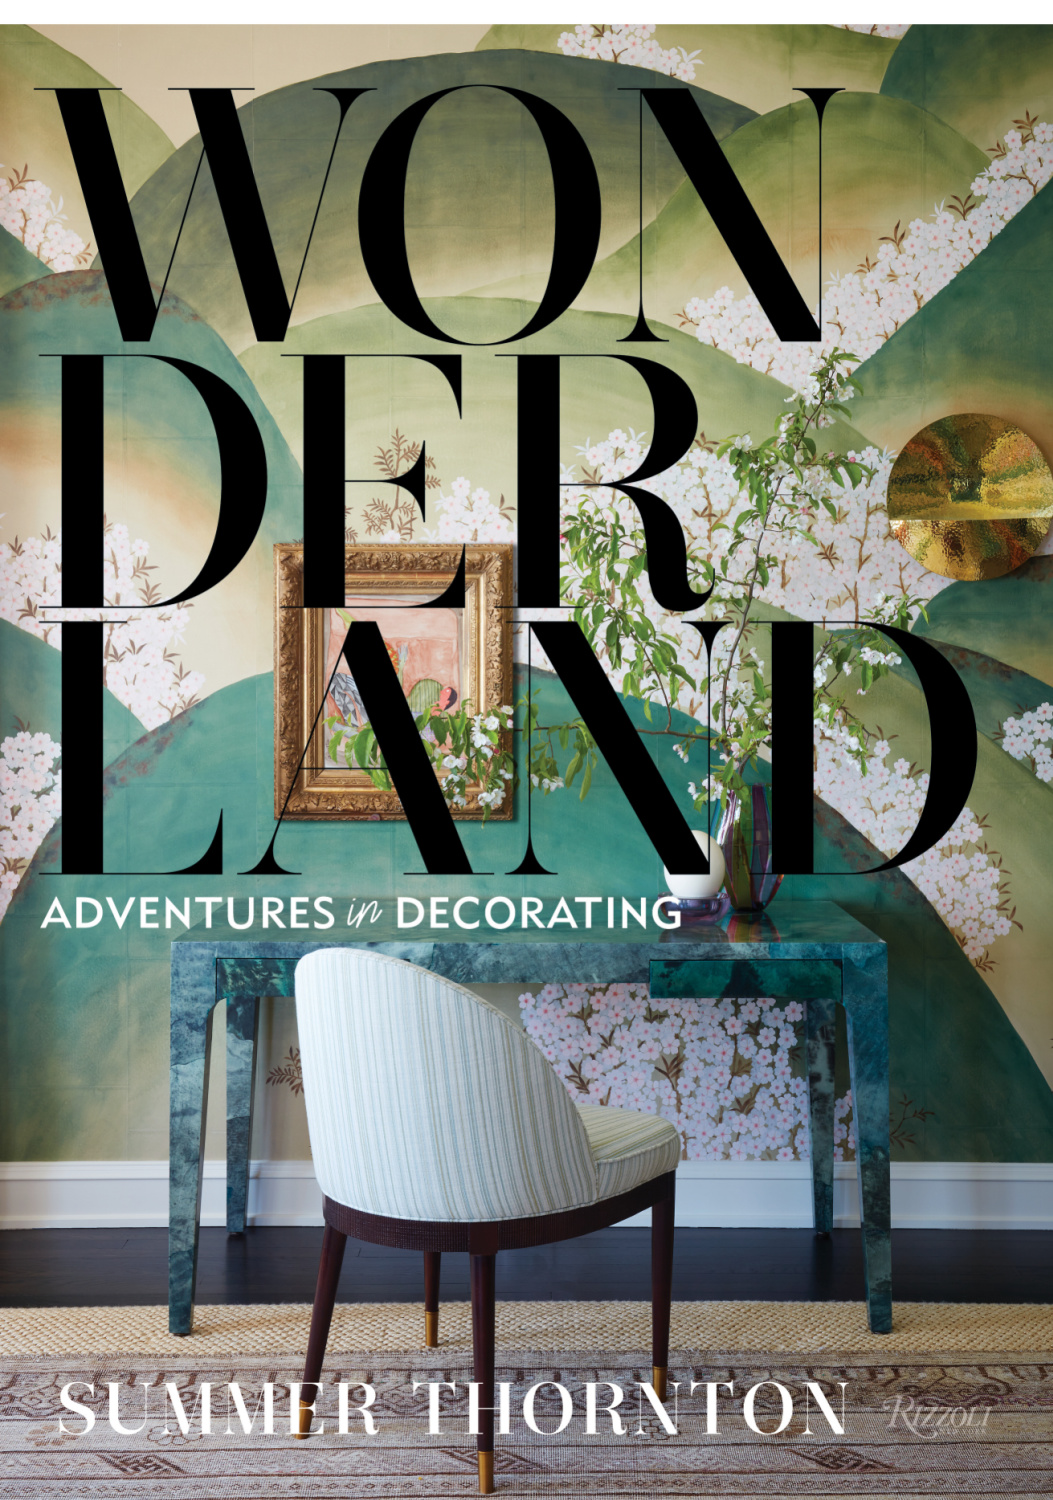 Summer Thornton's WONDERLAND: ADVENTURES IN DECORATING (Rizzoli, 2022). Interior decorator Summer Thornton believes in designing with the wildest abandon: her world is one of nickel tubs, marble fireplaces, whimsical textiles, surprising patterns, and secret gardens. Often described as maximalist with a modern, fresh sensibility, Thornton manages to achieve highly polished, sophisticated interiors that indulge in a lighthearted, almost irreverent sense of whimsy. In her first book, she will inspire readers to follow their creative impulses and make their own rules.